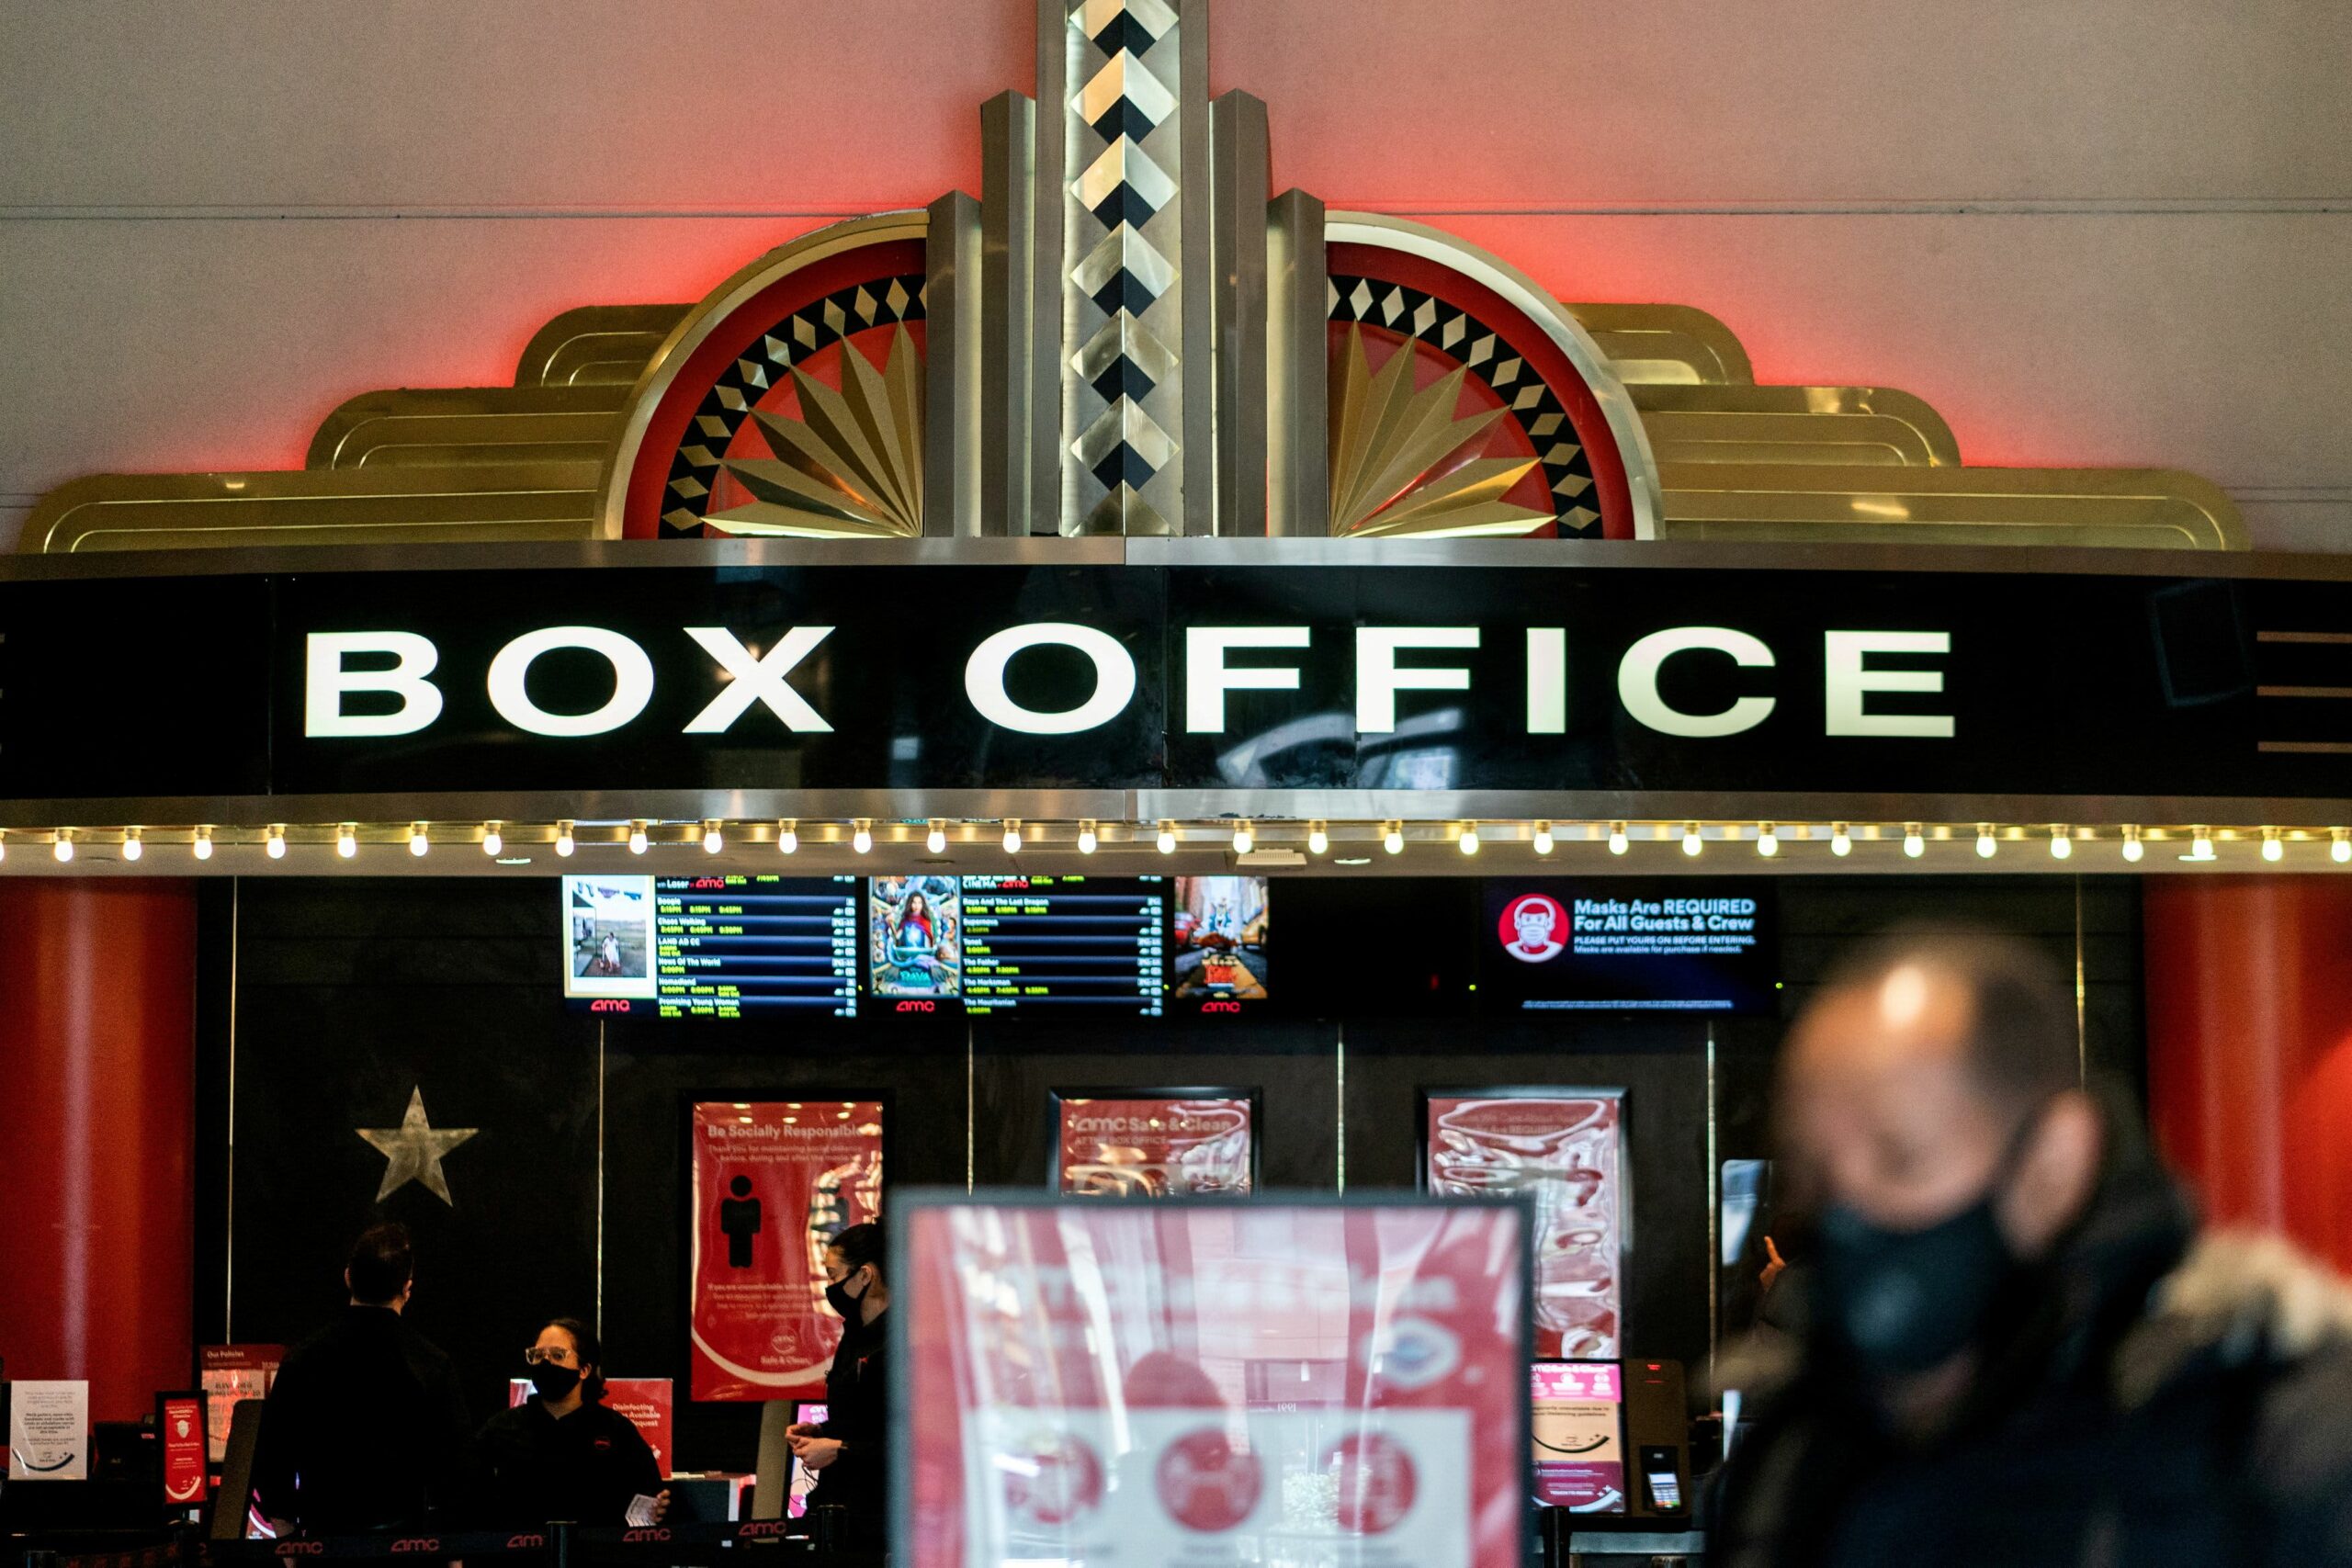 2021’s U.S. box office trails 2019’s movie ticket sales by 70%